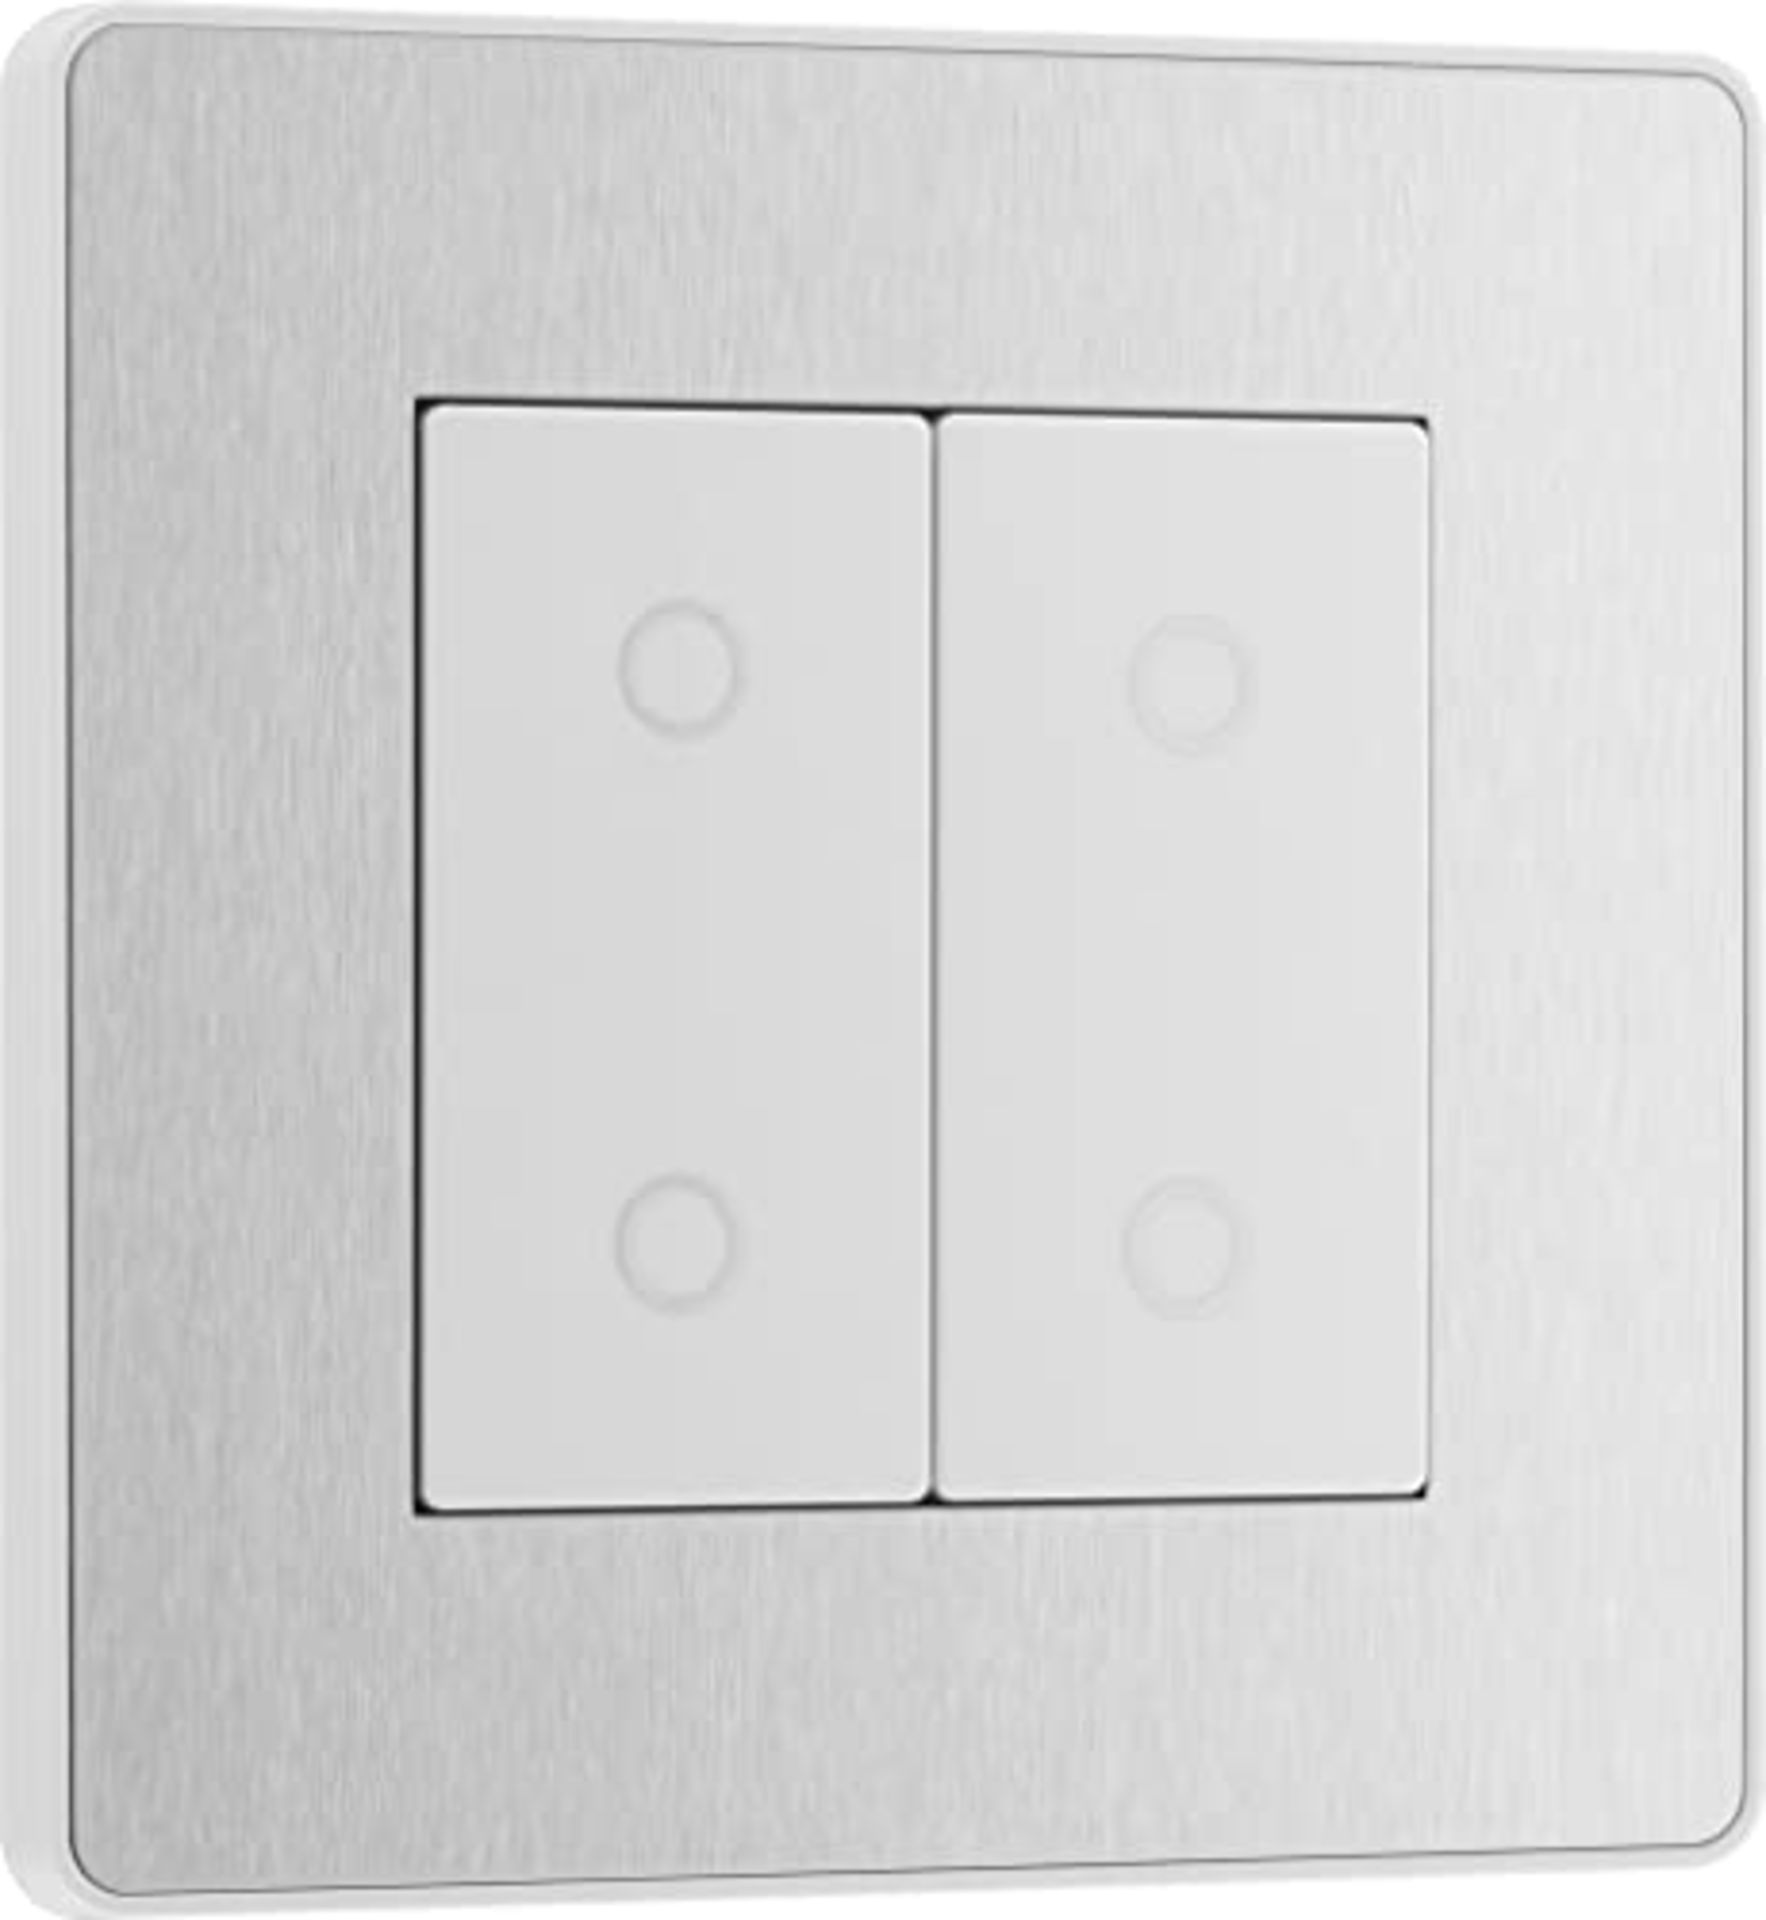 BG Electrical Evolve Double Touch Dimmer Switch, 2-Way Master, 200W, Brushed Steel